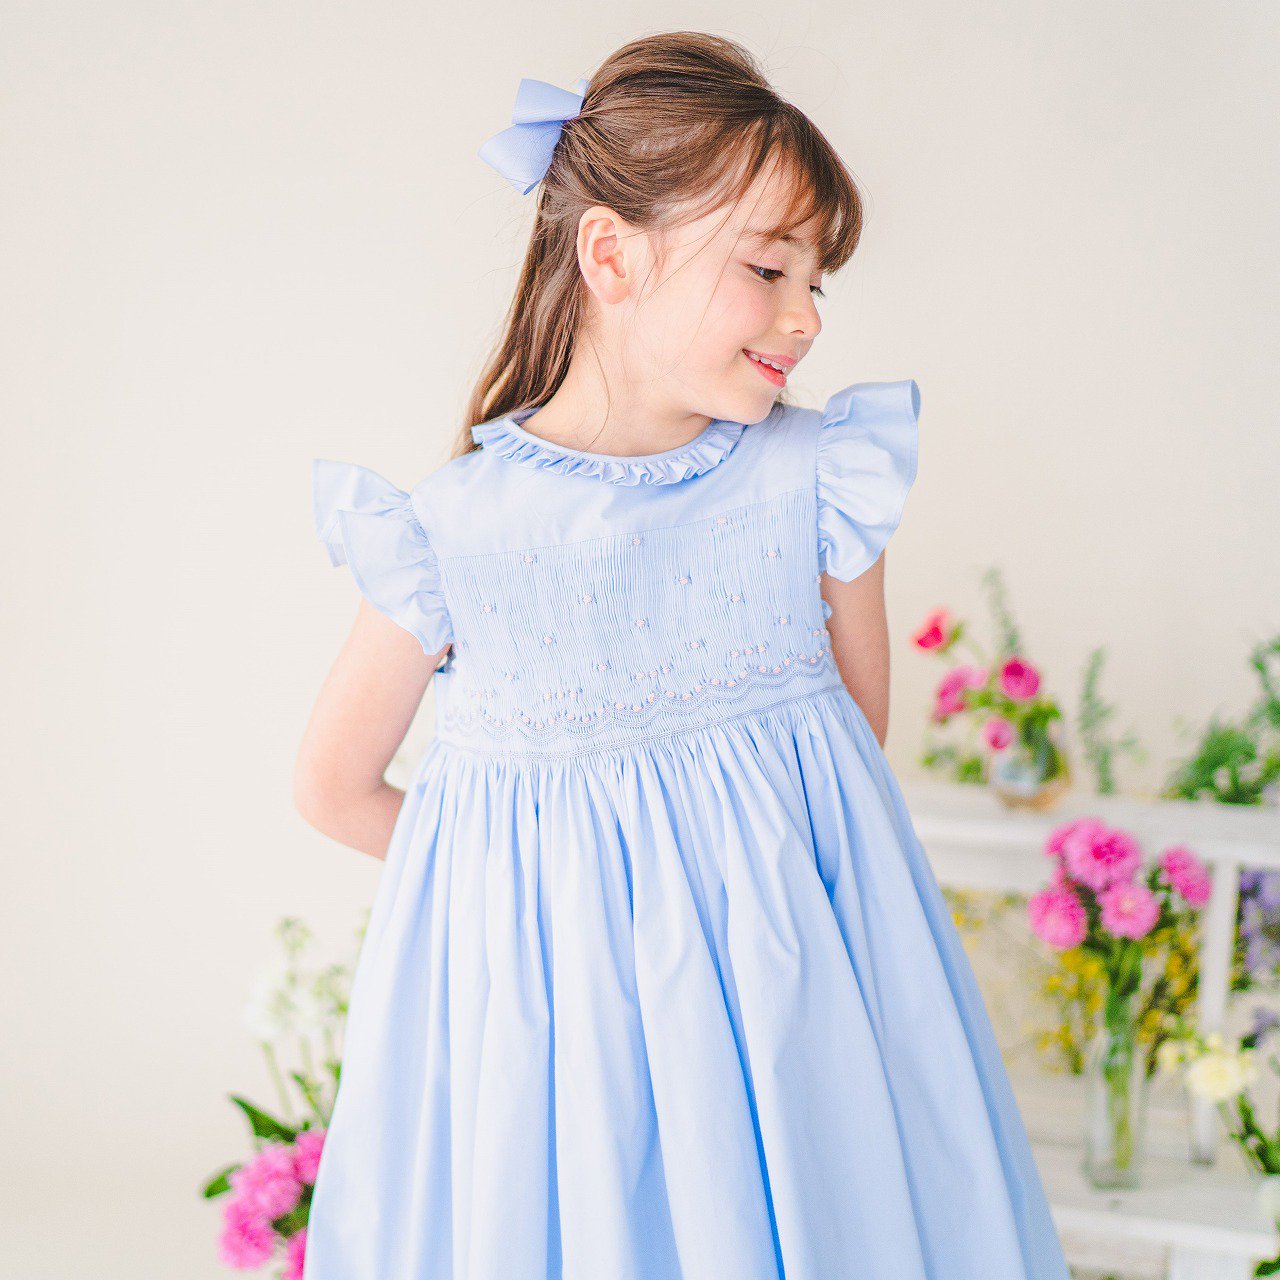 <img class='new_mark_img1' src='https://img.shop-pro.jp/img/new/icons1.gif' style='border:none;display:inline;margin:0px;padding:0px;width:auto;' />Charlotte sy Dimby - Ruffle sleeves dress BLUE (ISETAN)